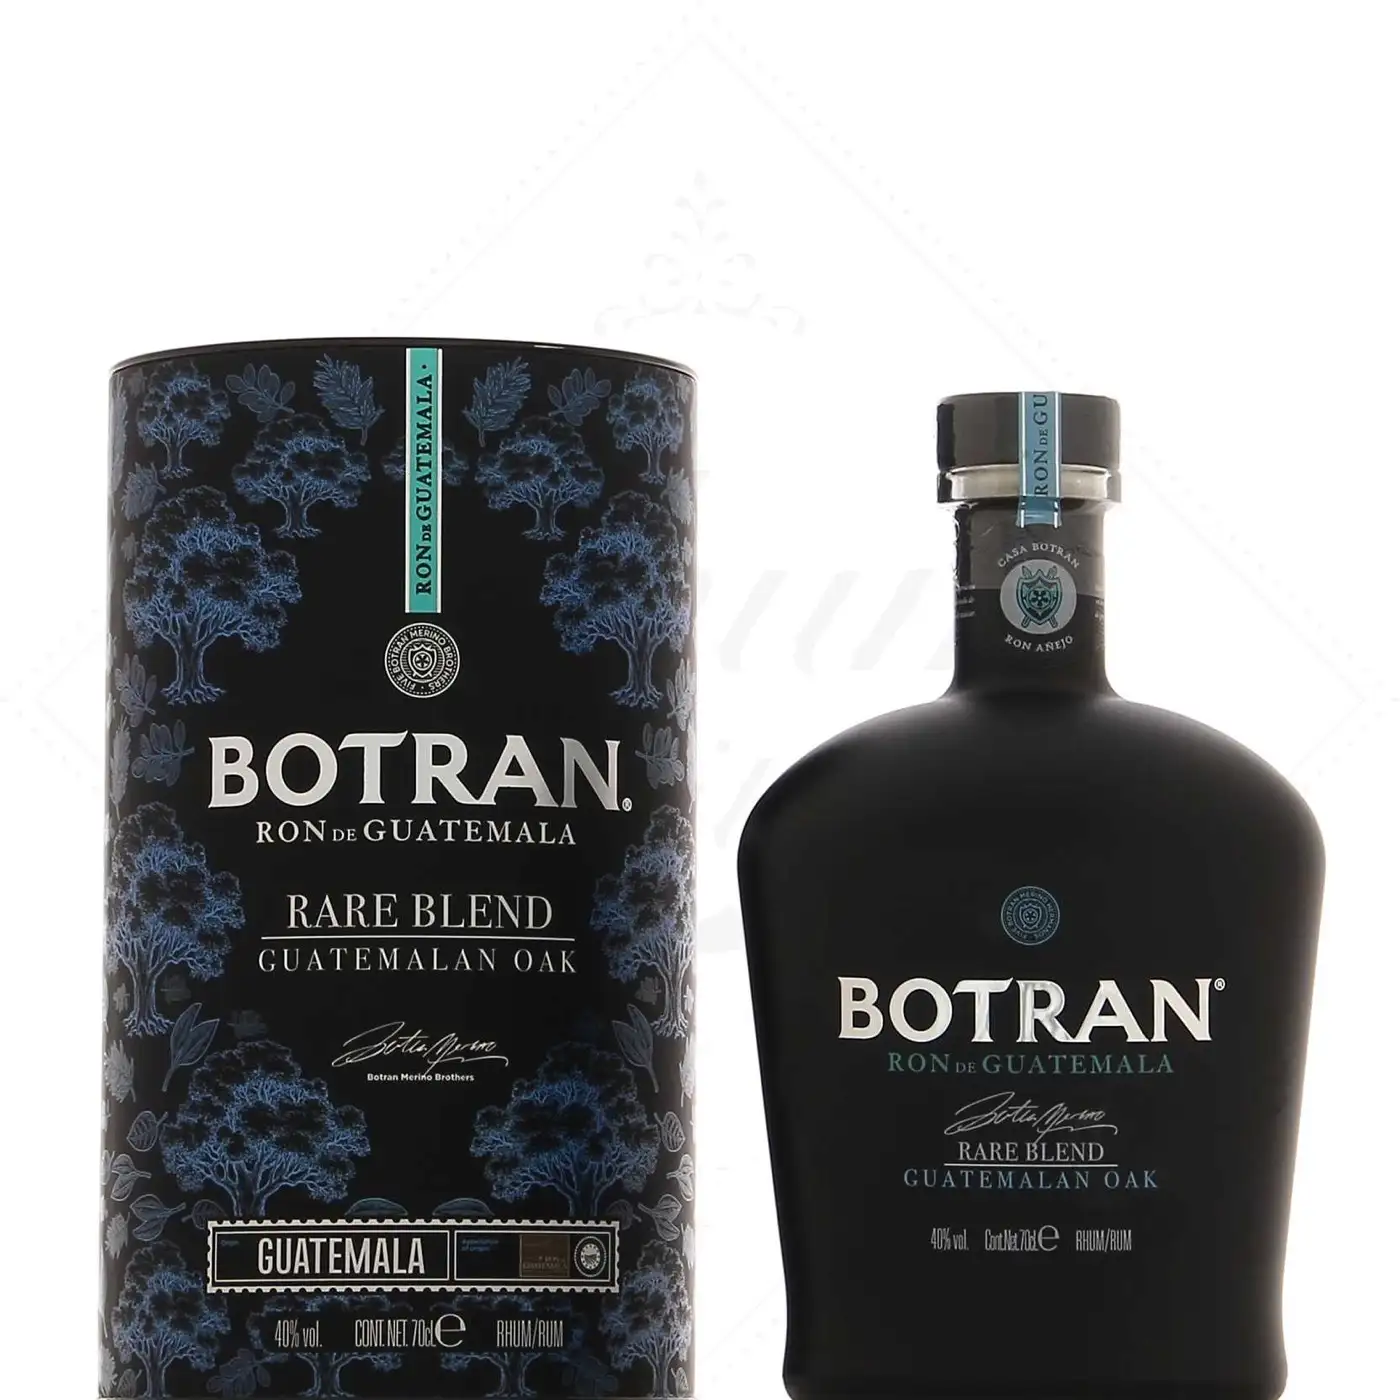 Image of the front of the bottle of the rum Ron Botran Rare Blend Guatemalan Oak